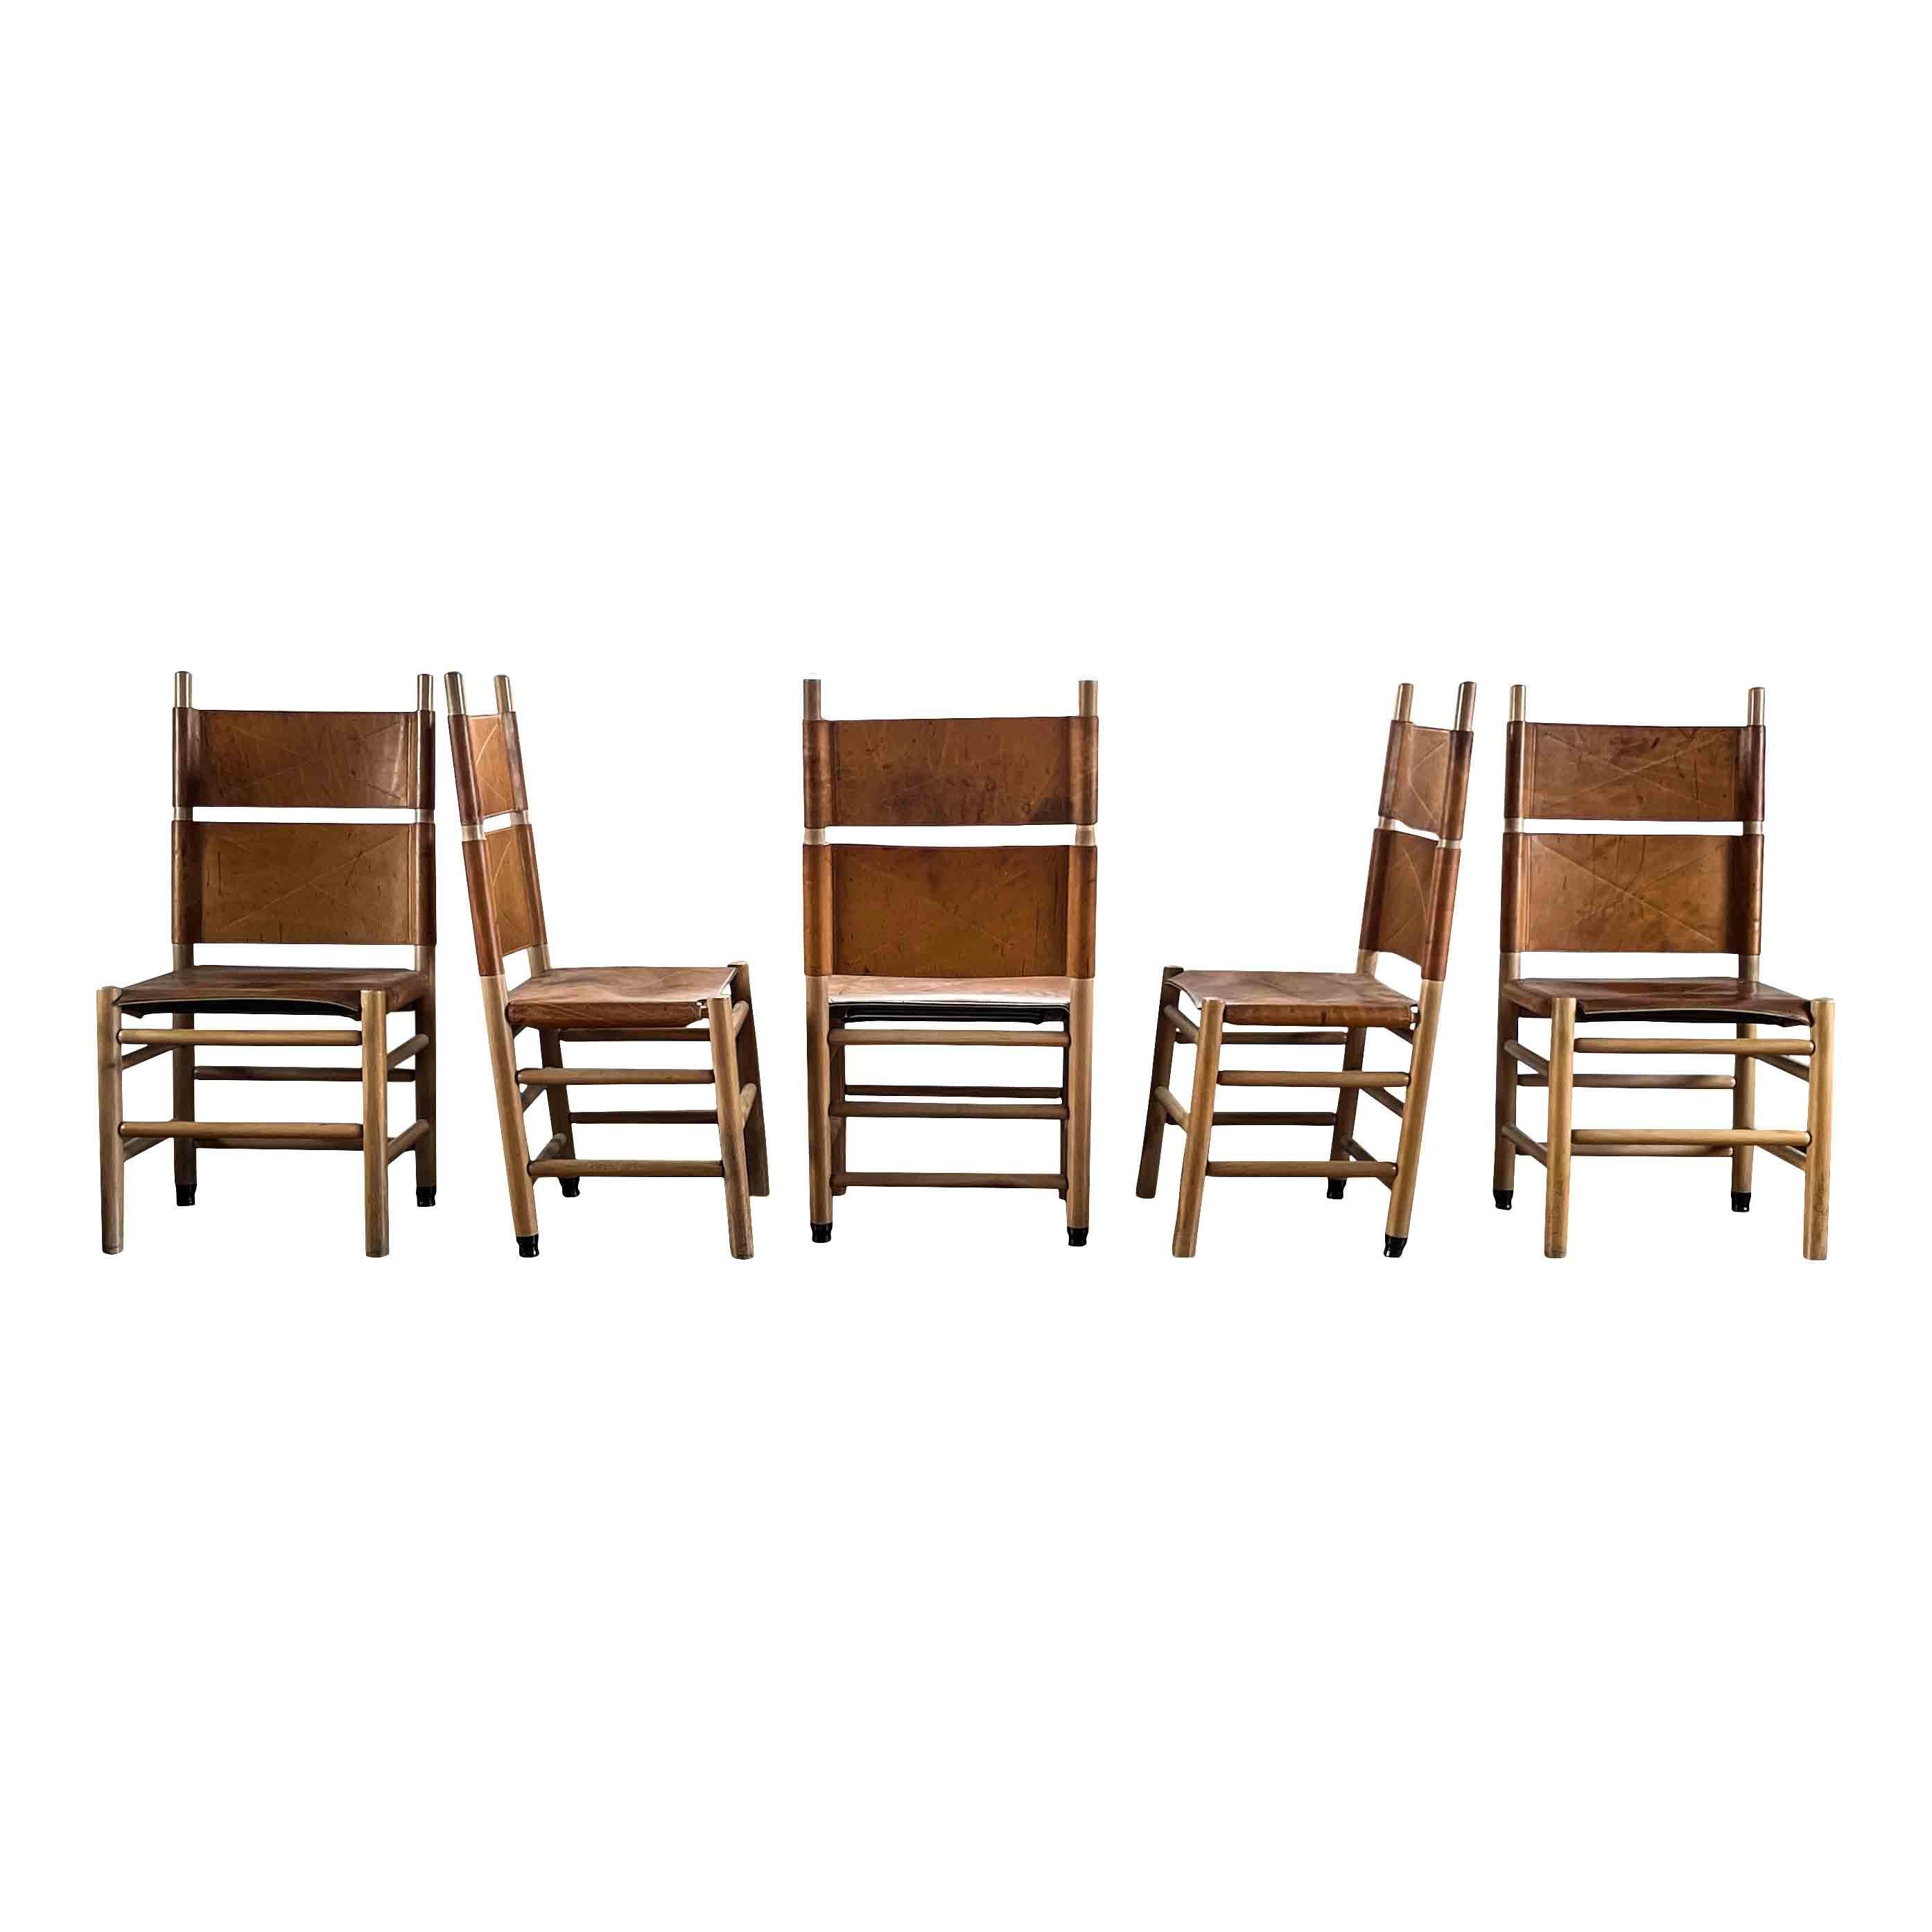 Mid-Century Modern Carlo Scarpa Cognac Leather “Kentucky” Dining Chair for Bernini, 1977, Set of 5 For Sale